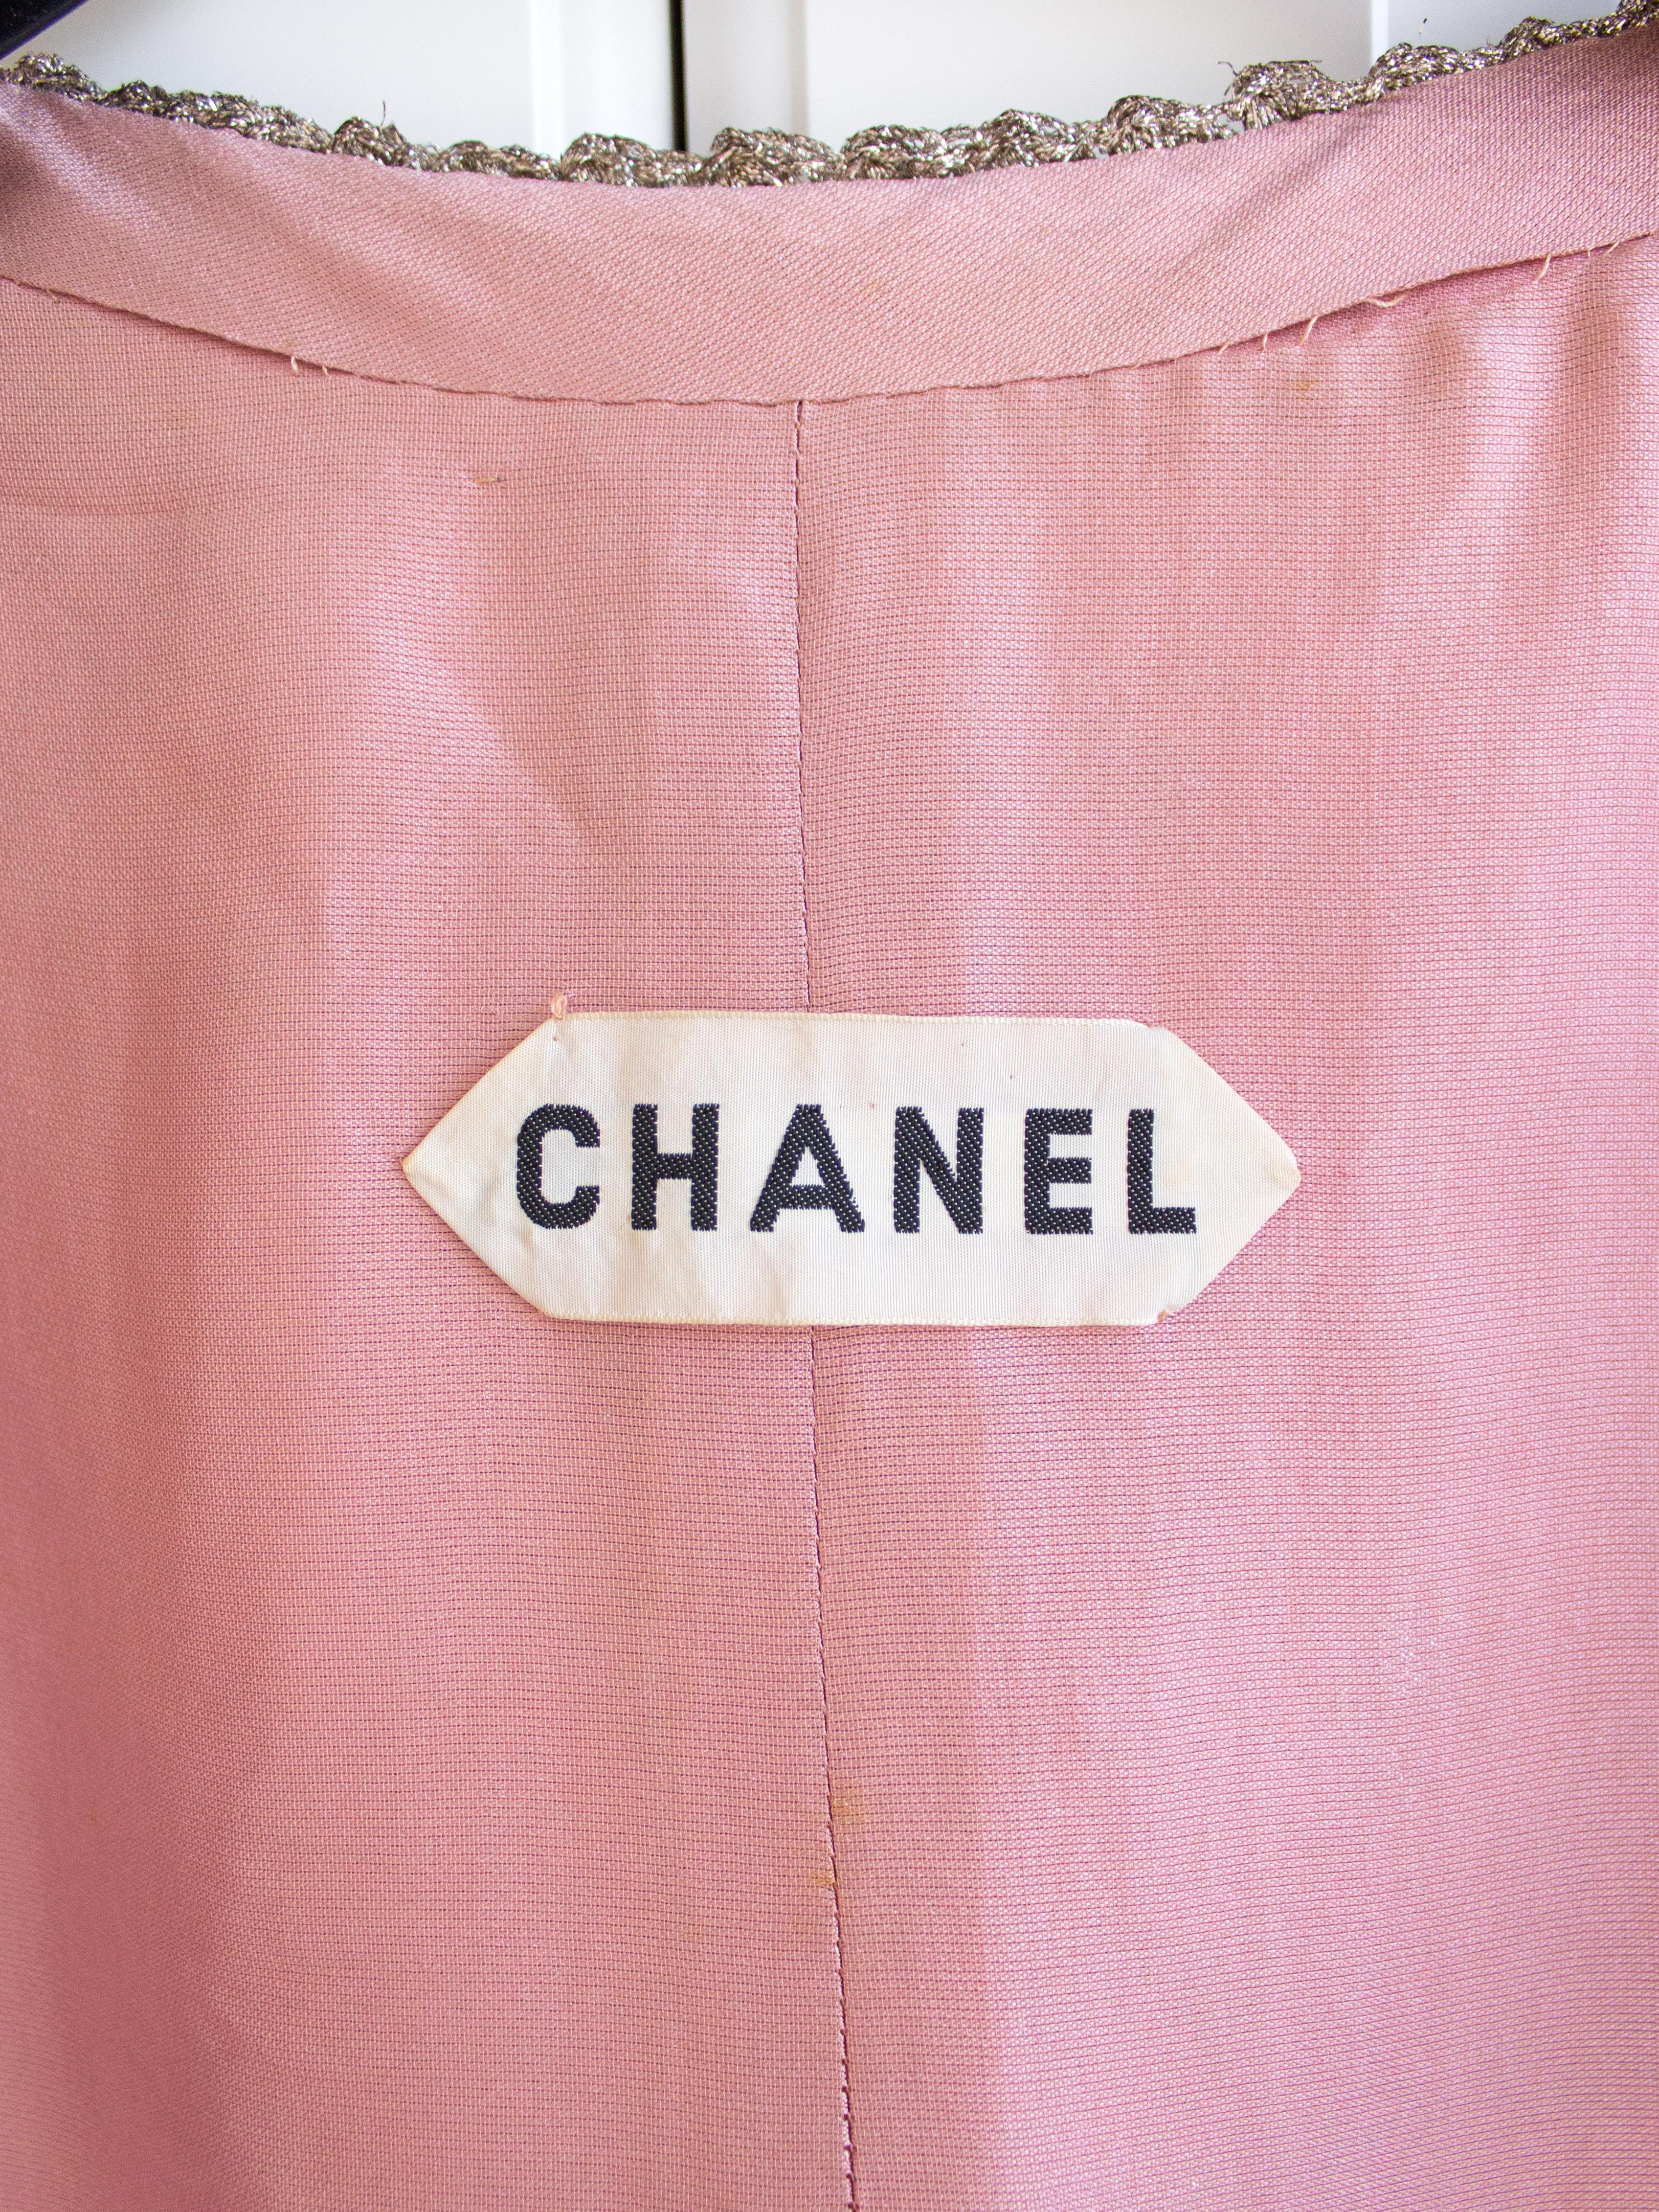 Chanel Vintage Haute Couture 1960s Pink Silver Braided Brocade Jacket Skirt Suit 8